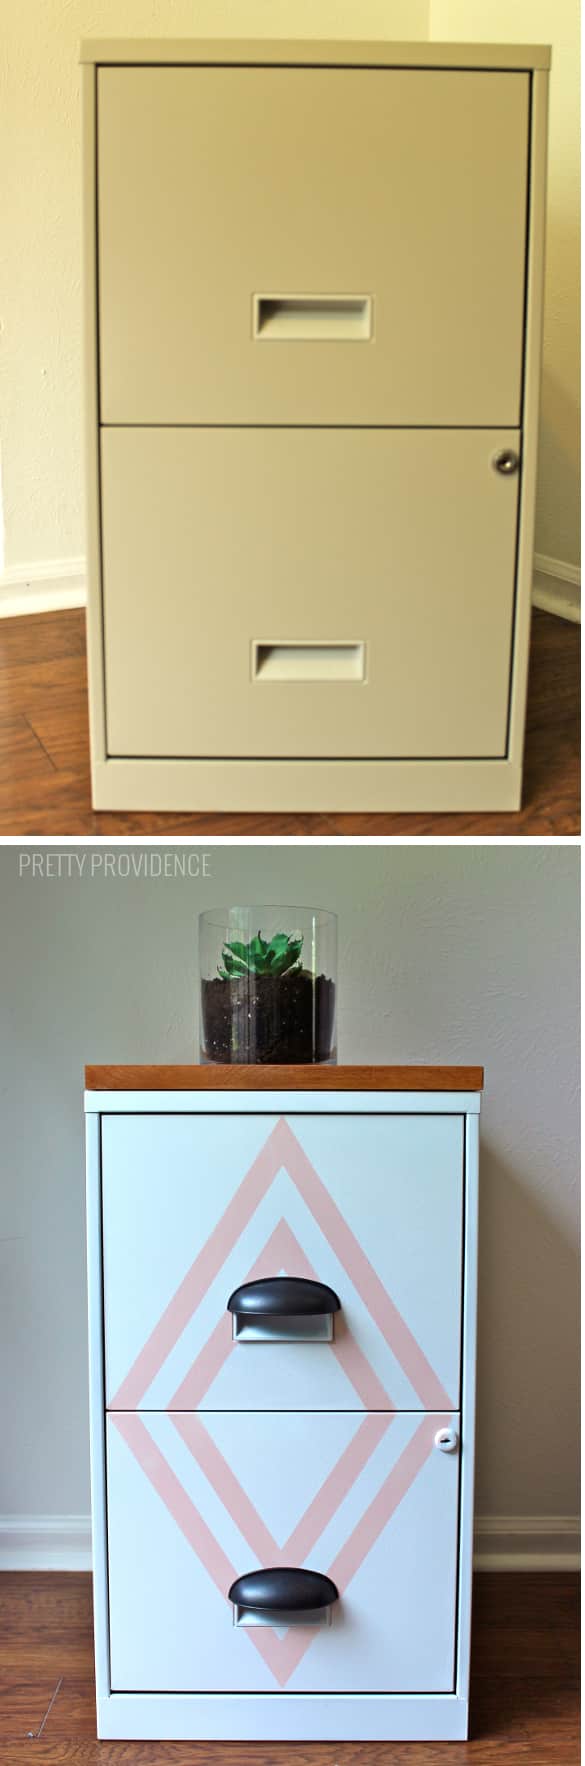 filing cabinet makeover! with a little paint, new hardware and a cute wood top you've got a stylish piece instead of an eyesore!